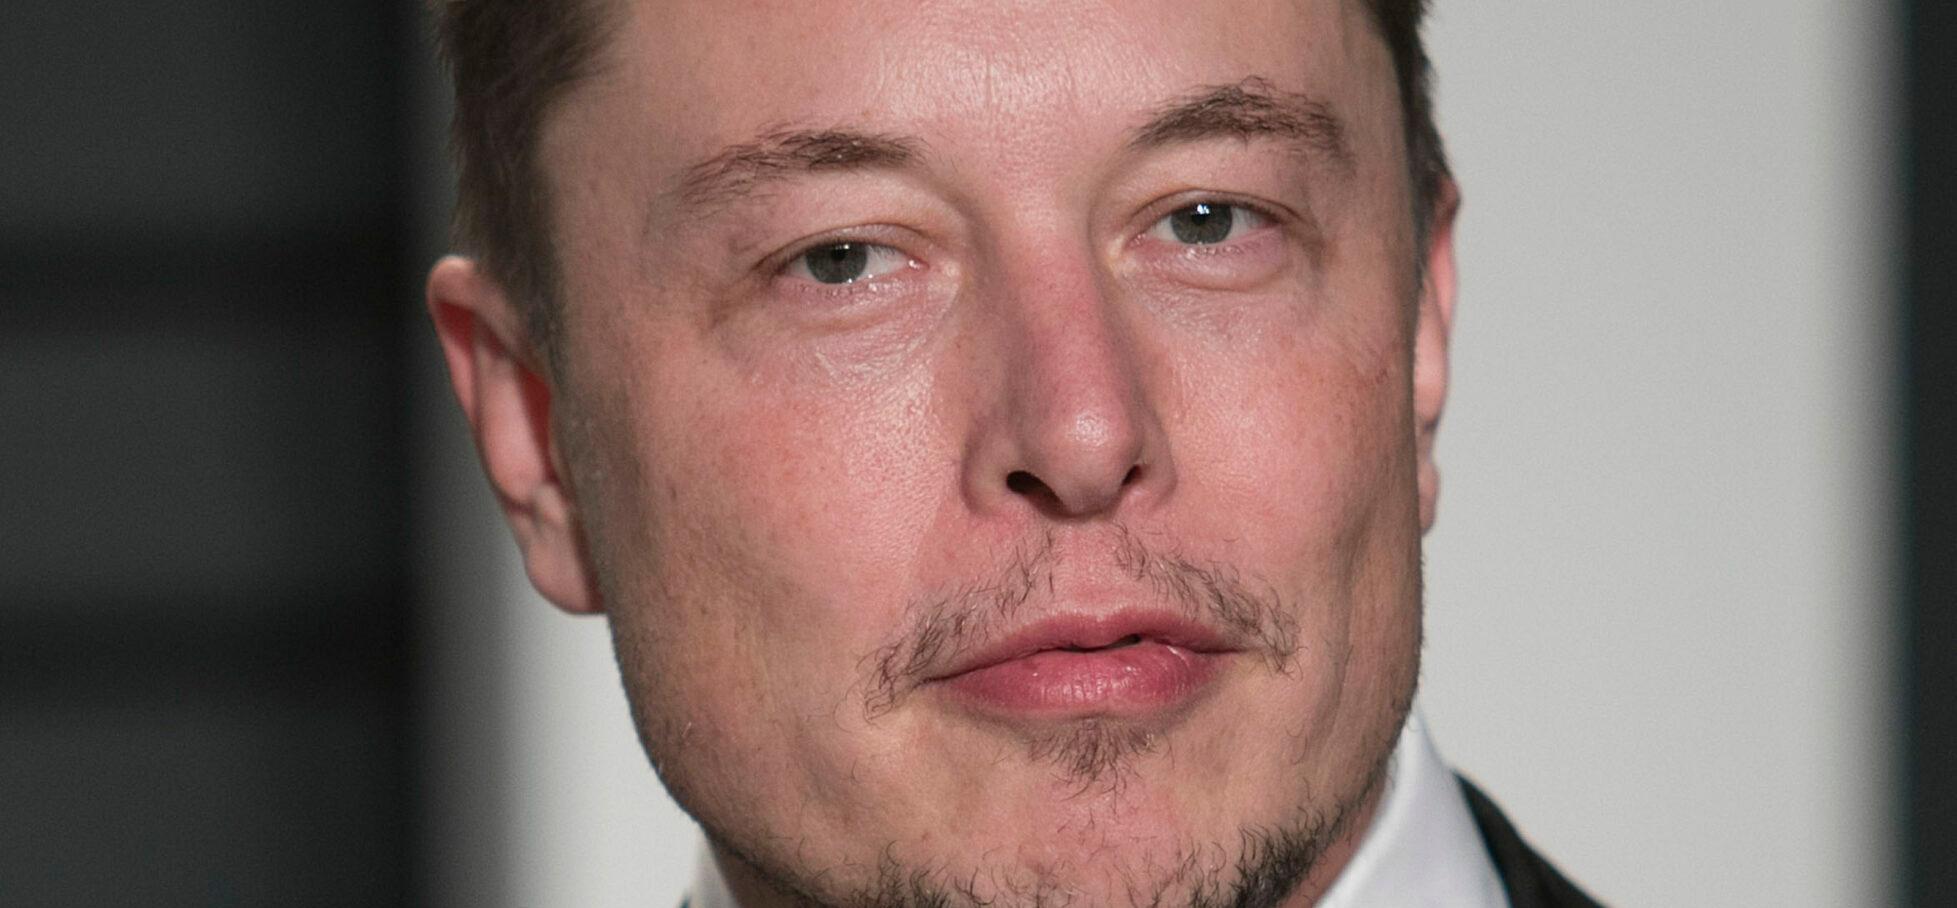 Elon Musk’s Child Files To Change Gender, Name To End Relationship With Father